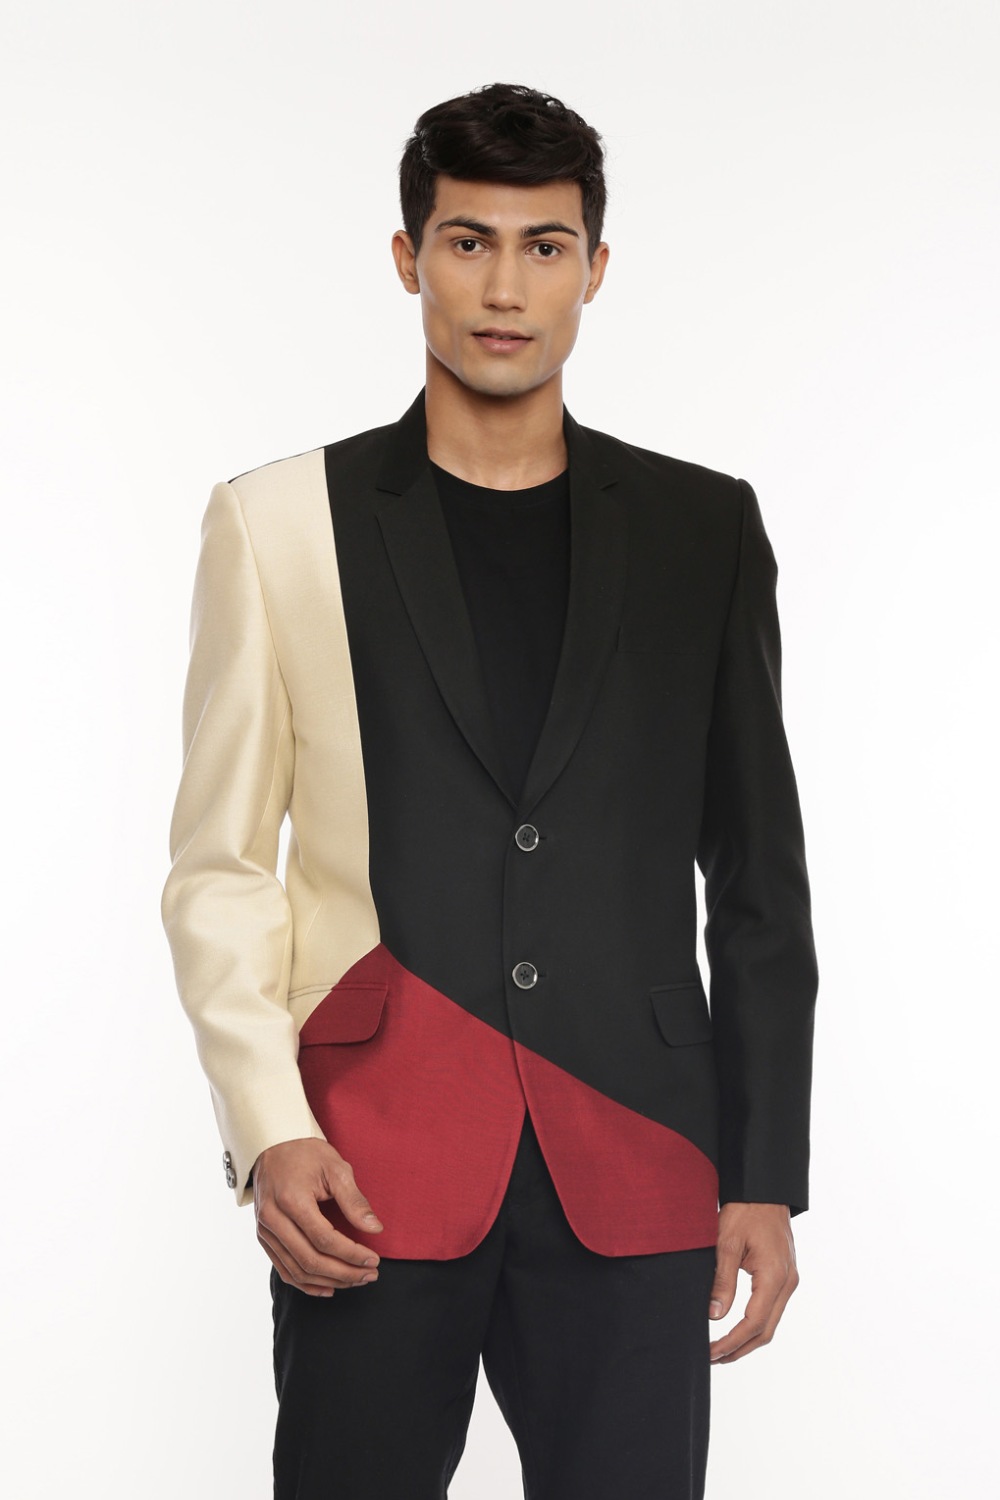 MAYANK MODI presents 3 Color Two Button Blazer exclusively at FEI